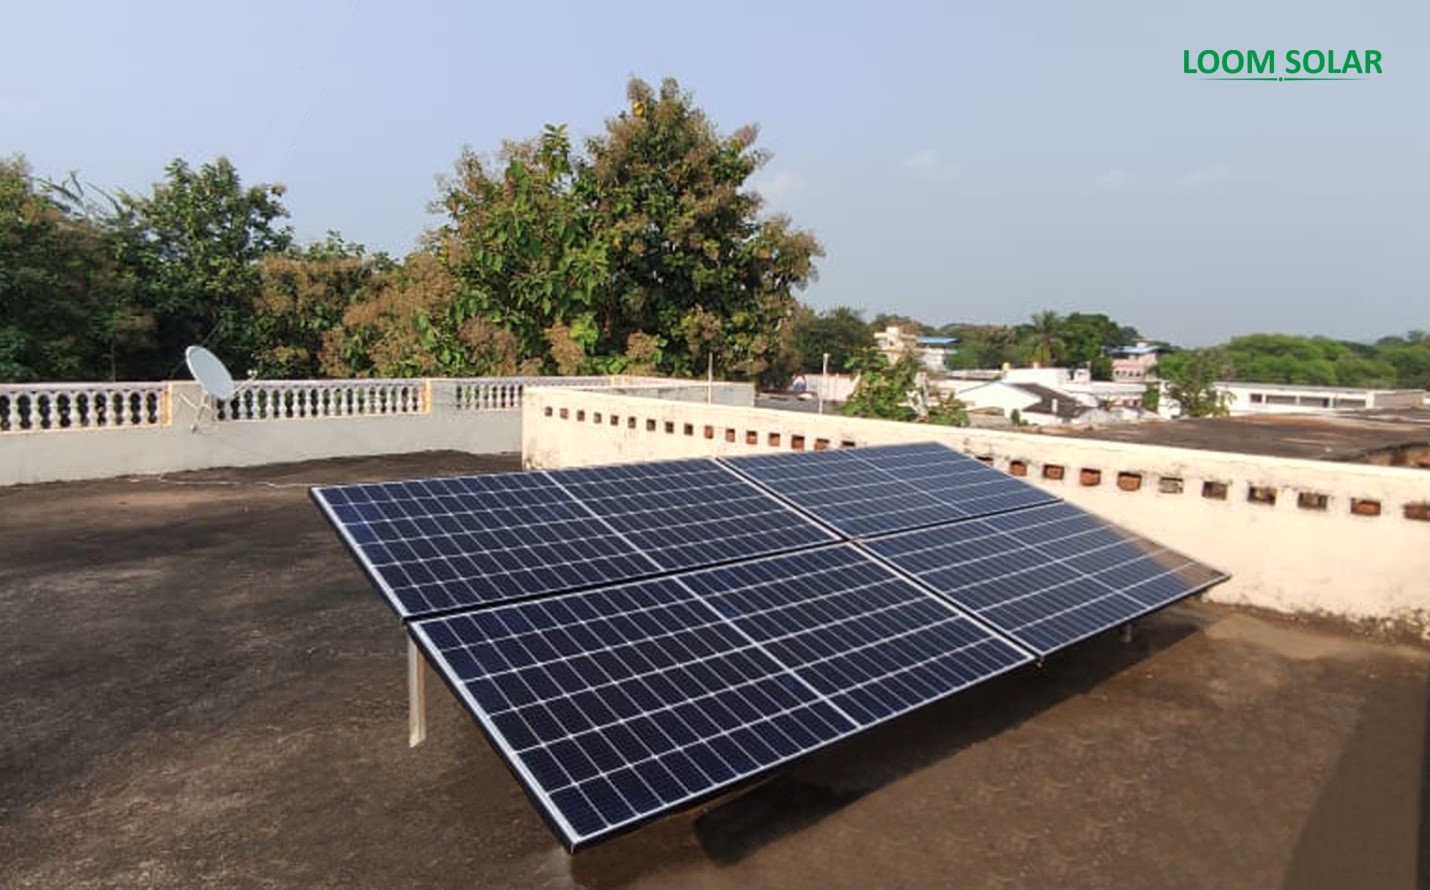 Non-Technical Features You Must Look For In a Solar Panel